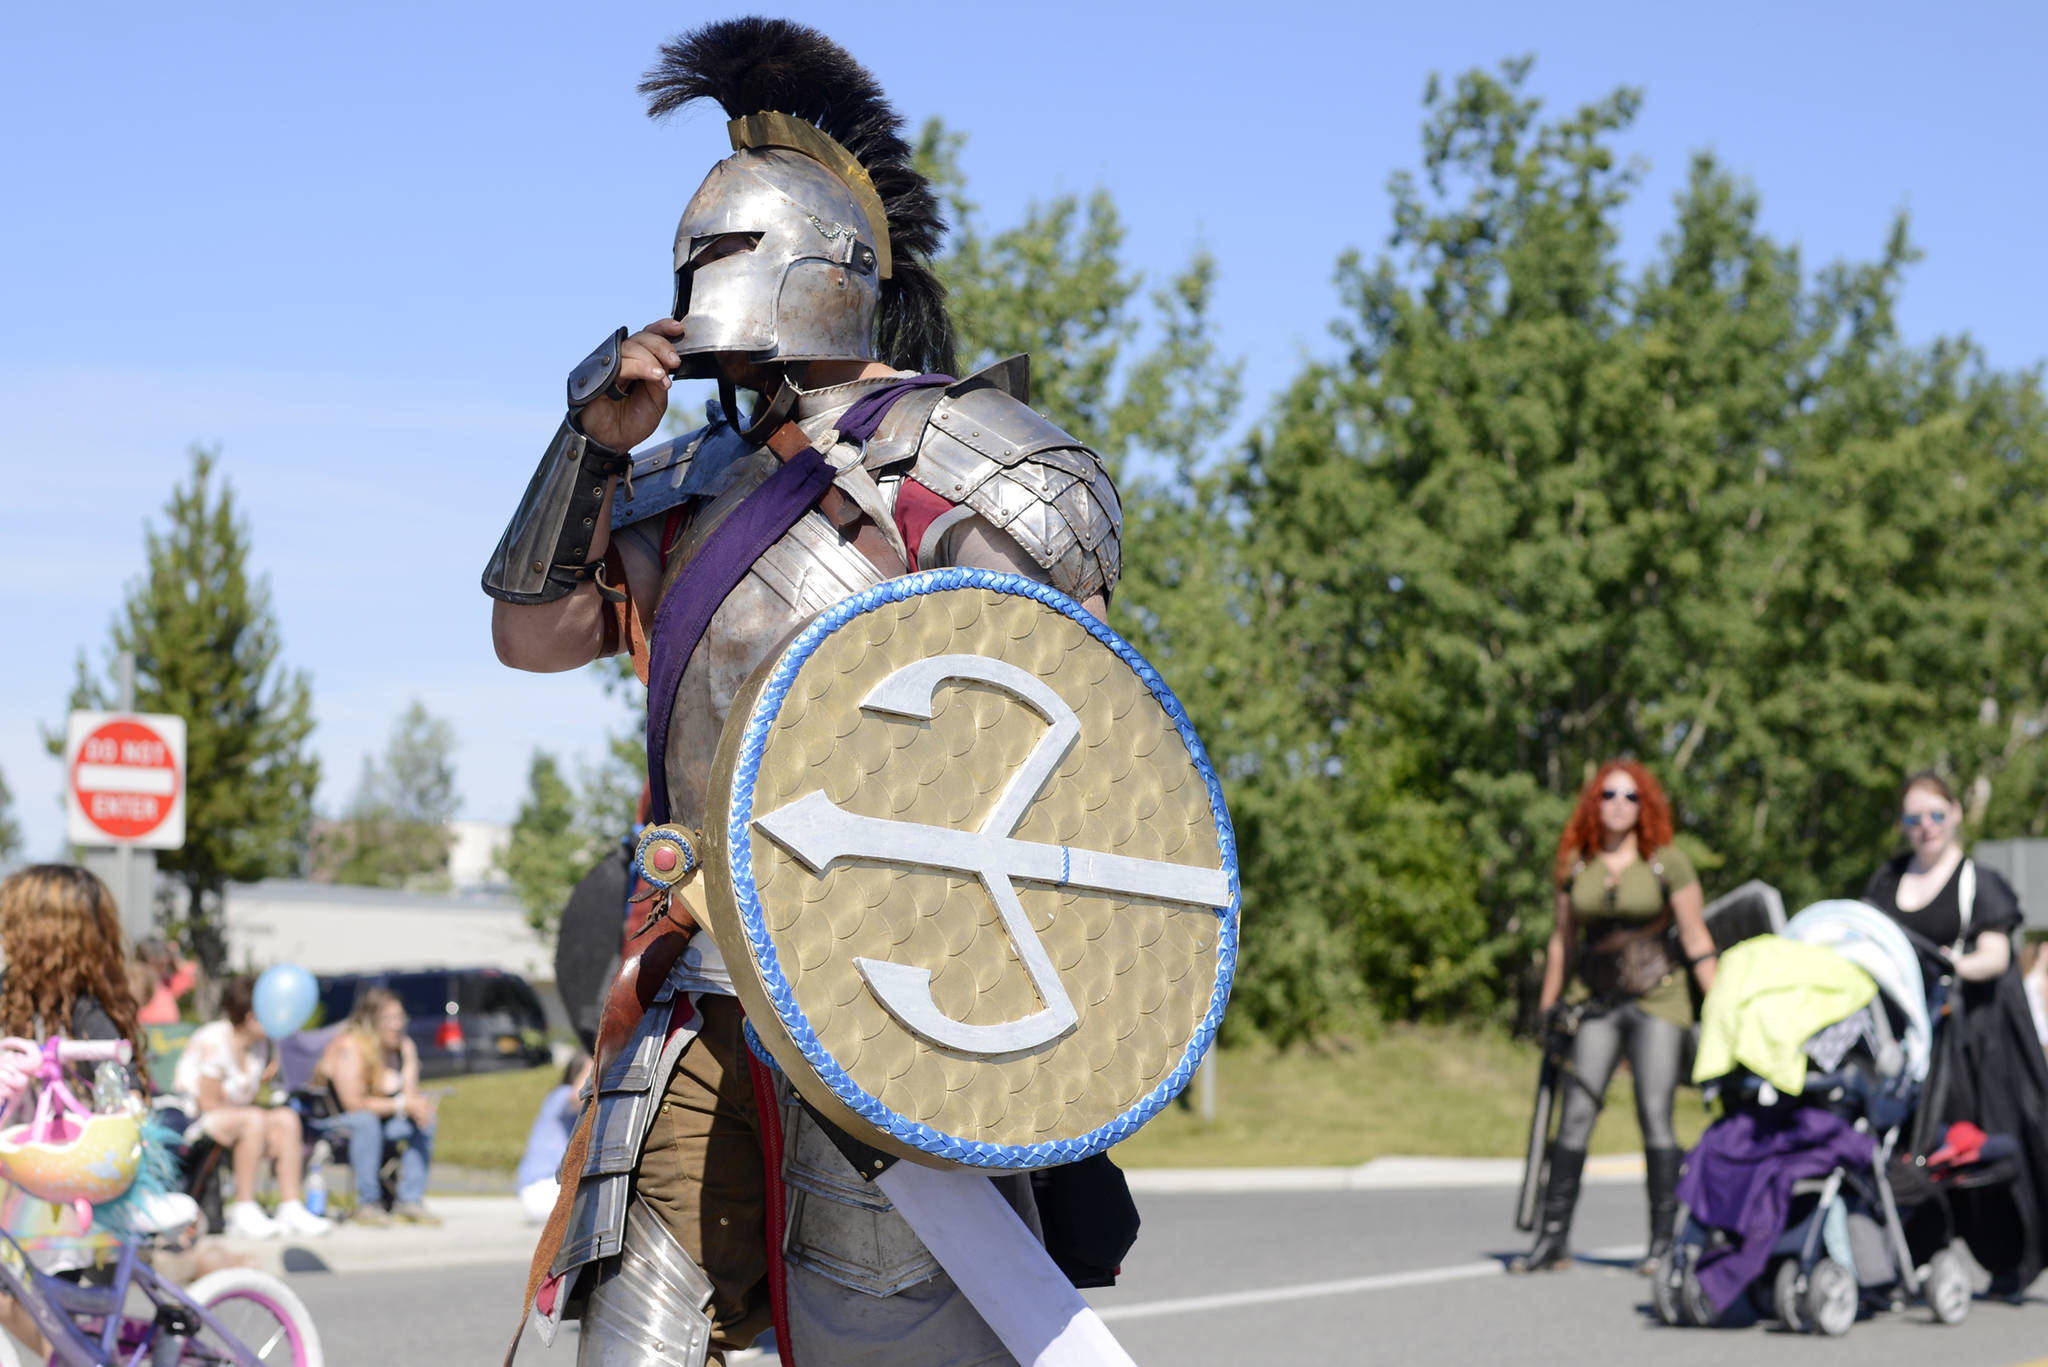 Dressed in armor, a member of the live-action roleplaying group Frozen Coast marches in the Soldotna Progress Days Parade on Saturday, July 22, 2017 in Soldotna, Alaska.